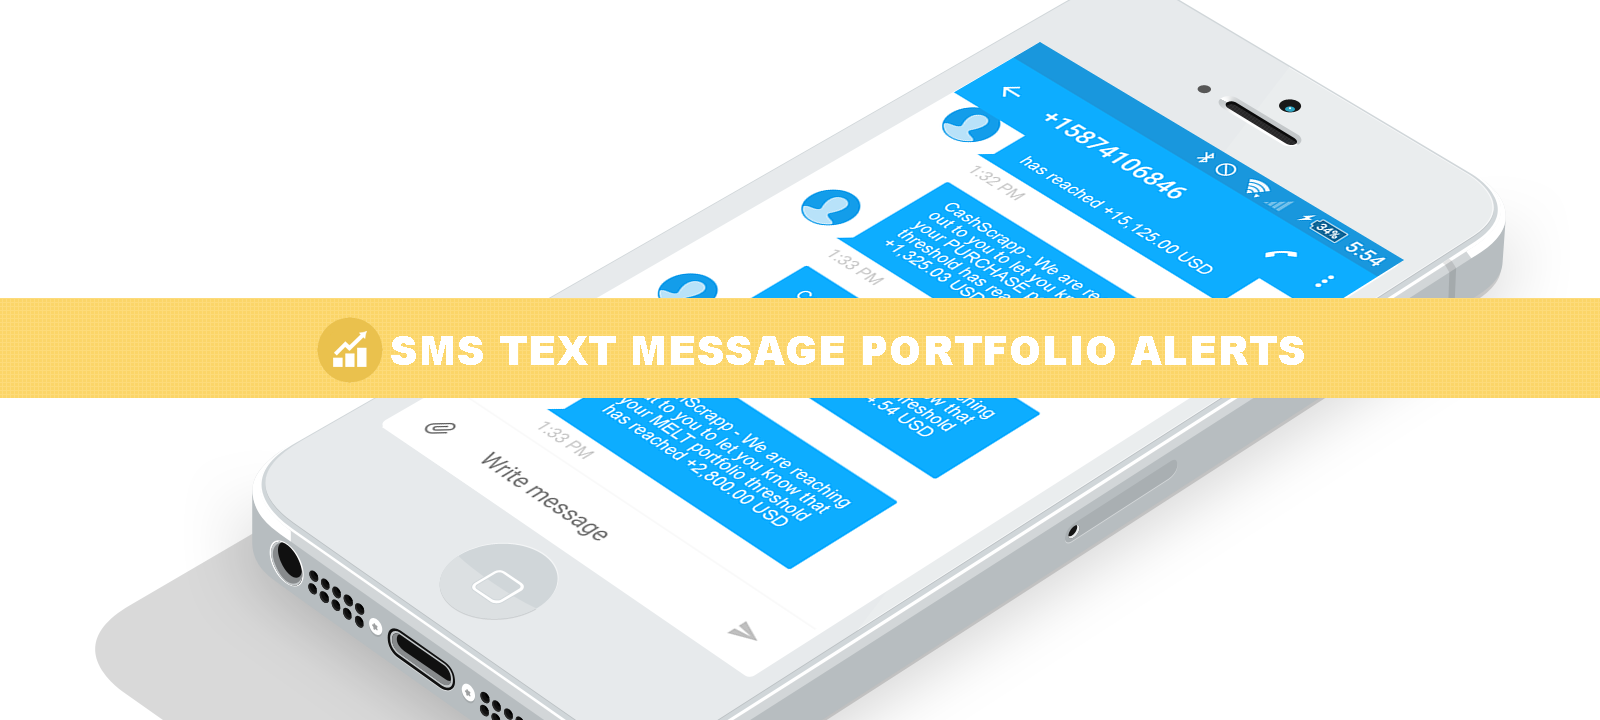 SMS text message alerts when your portfolio hits your configured threshold.